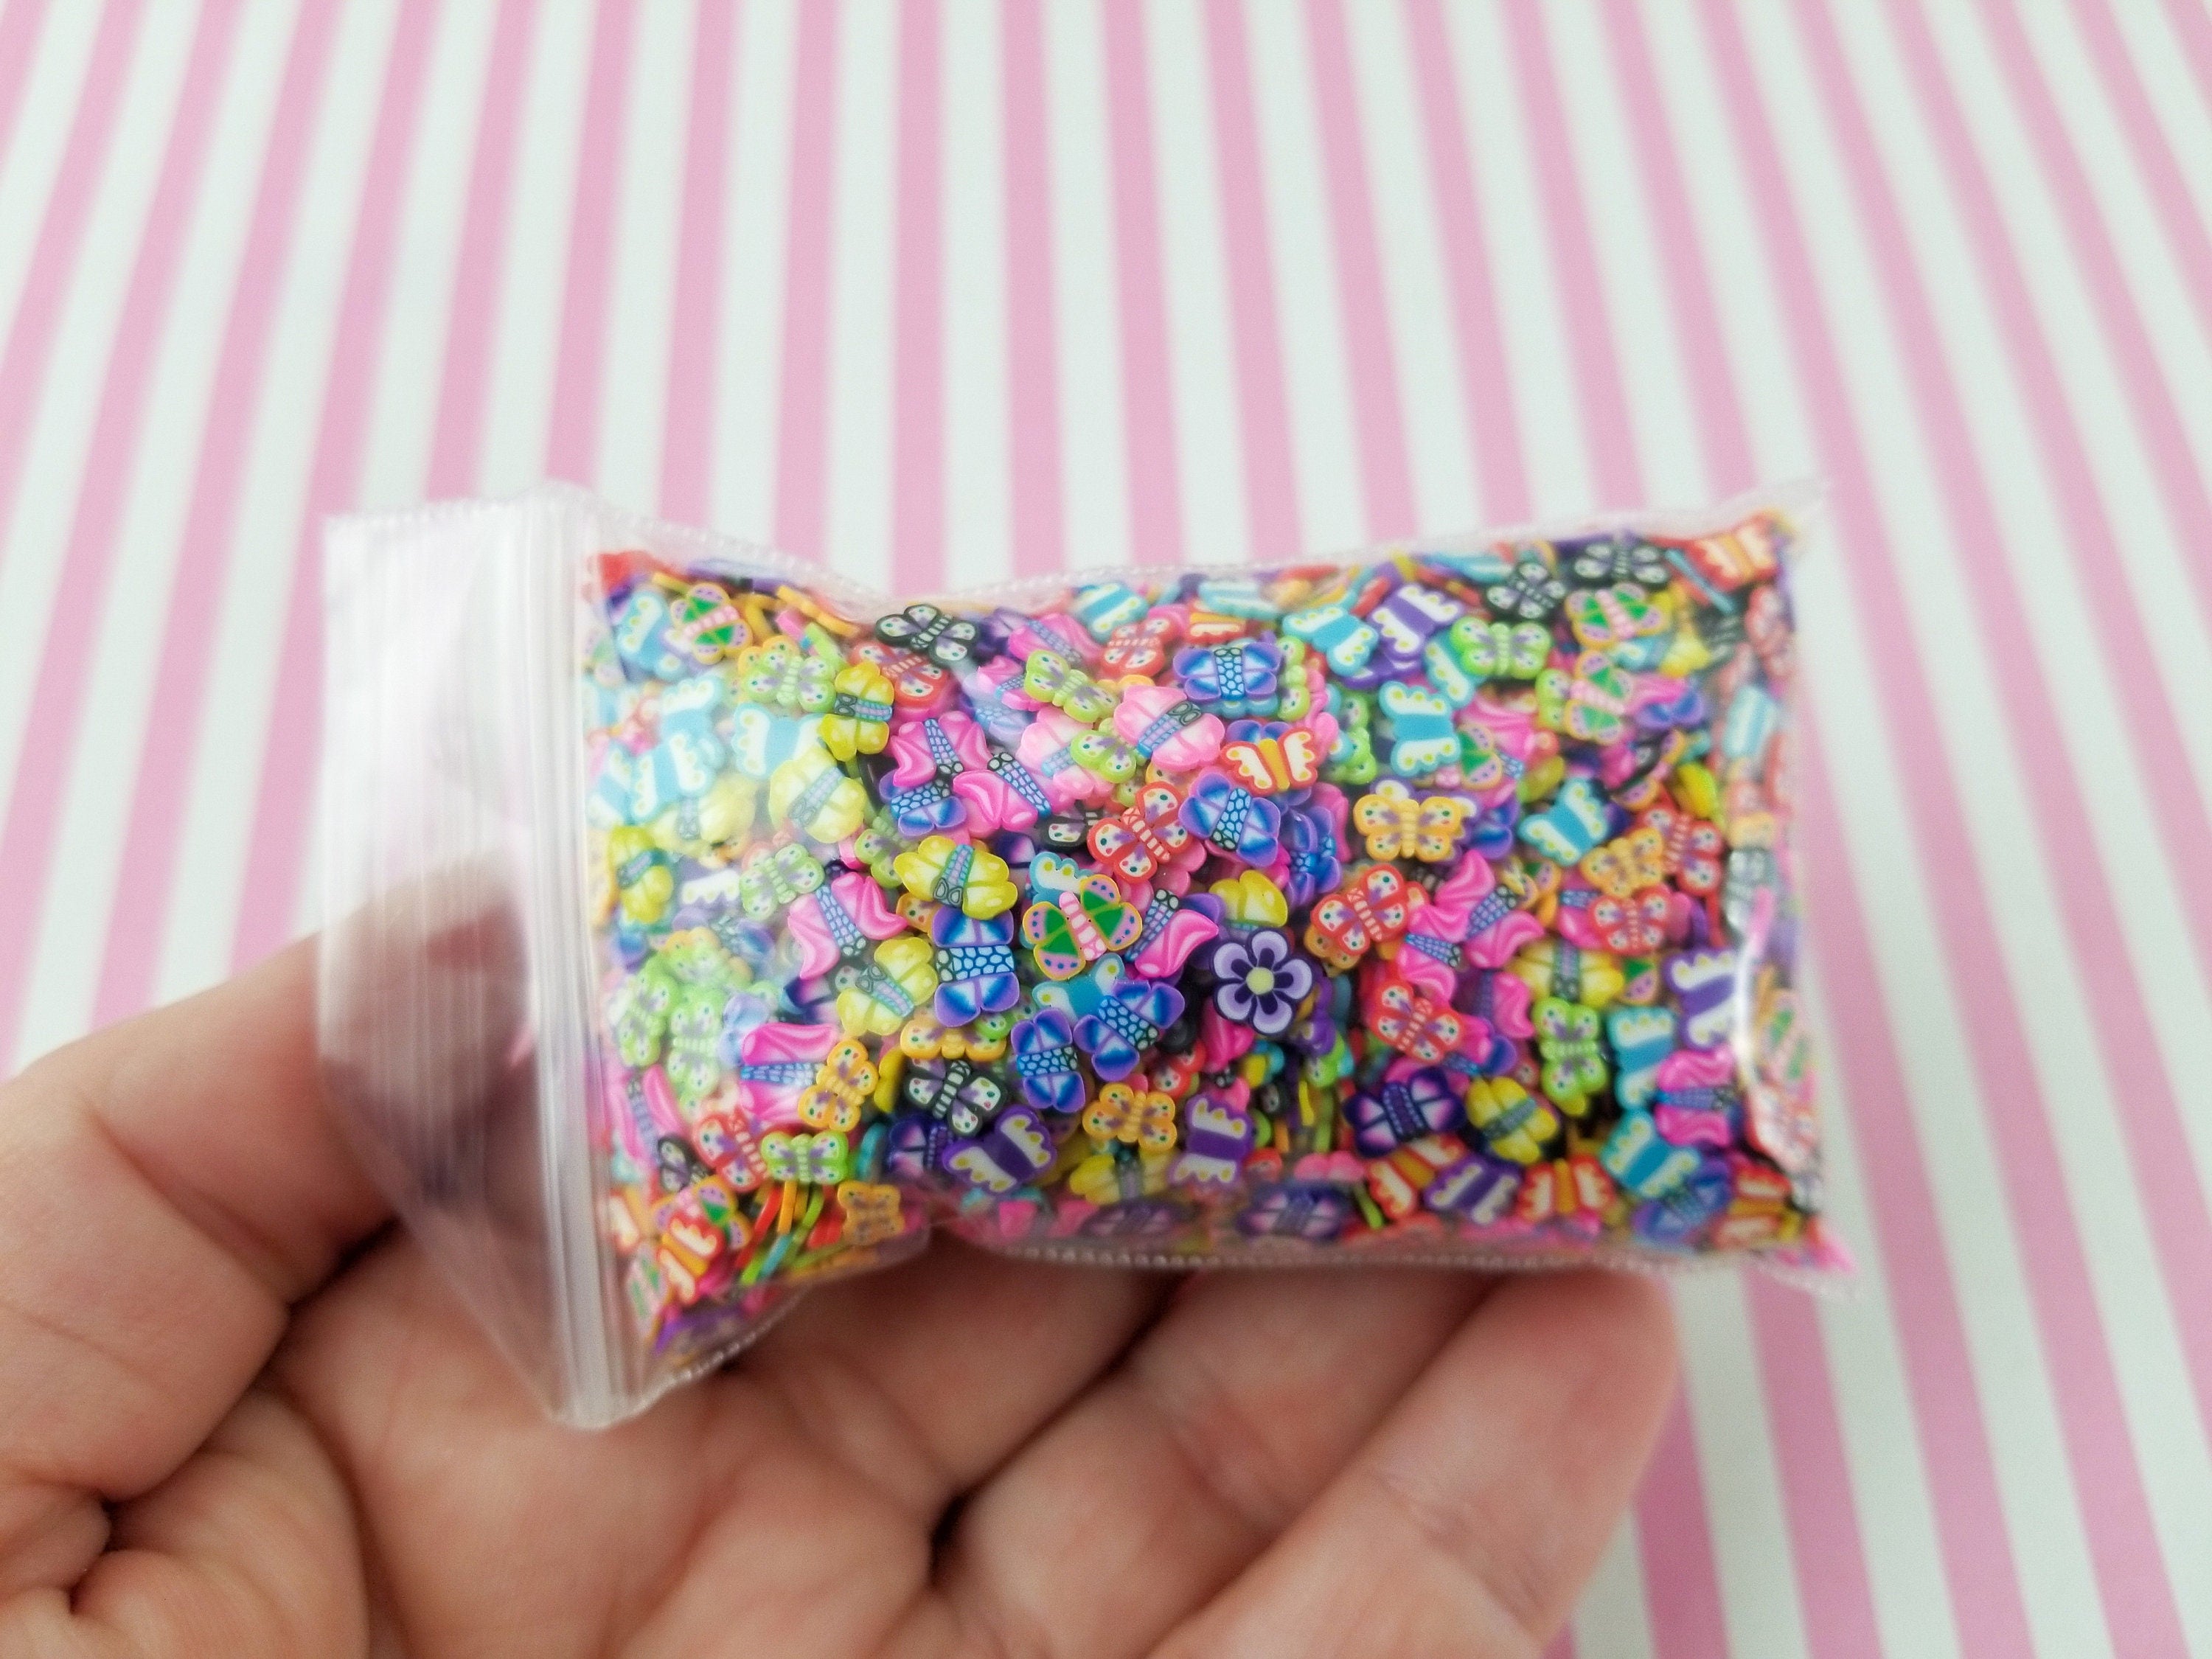 Watermelon Fake Sprinkle Mix, Fruit Slices Slime Toppings, Mix-ins for  Slime, Faux Sprinkles, Decoden, Nail Art 